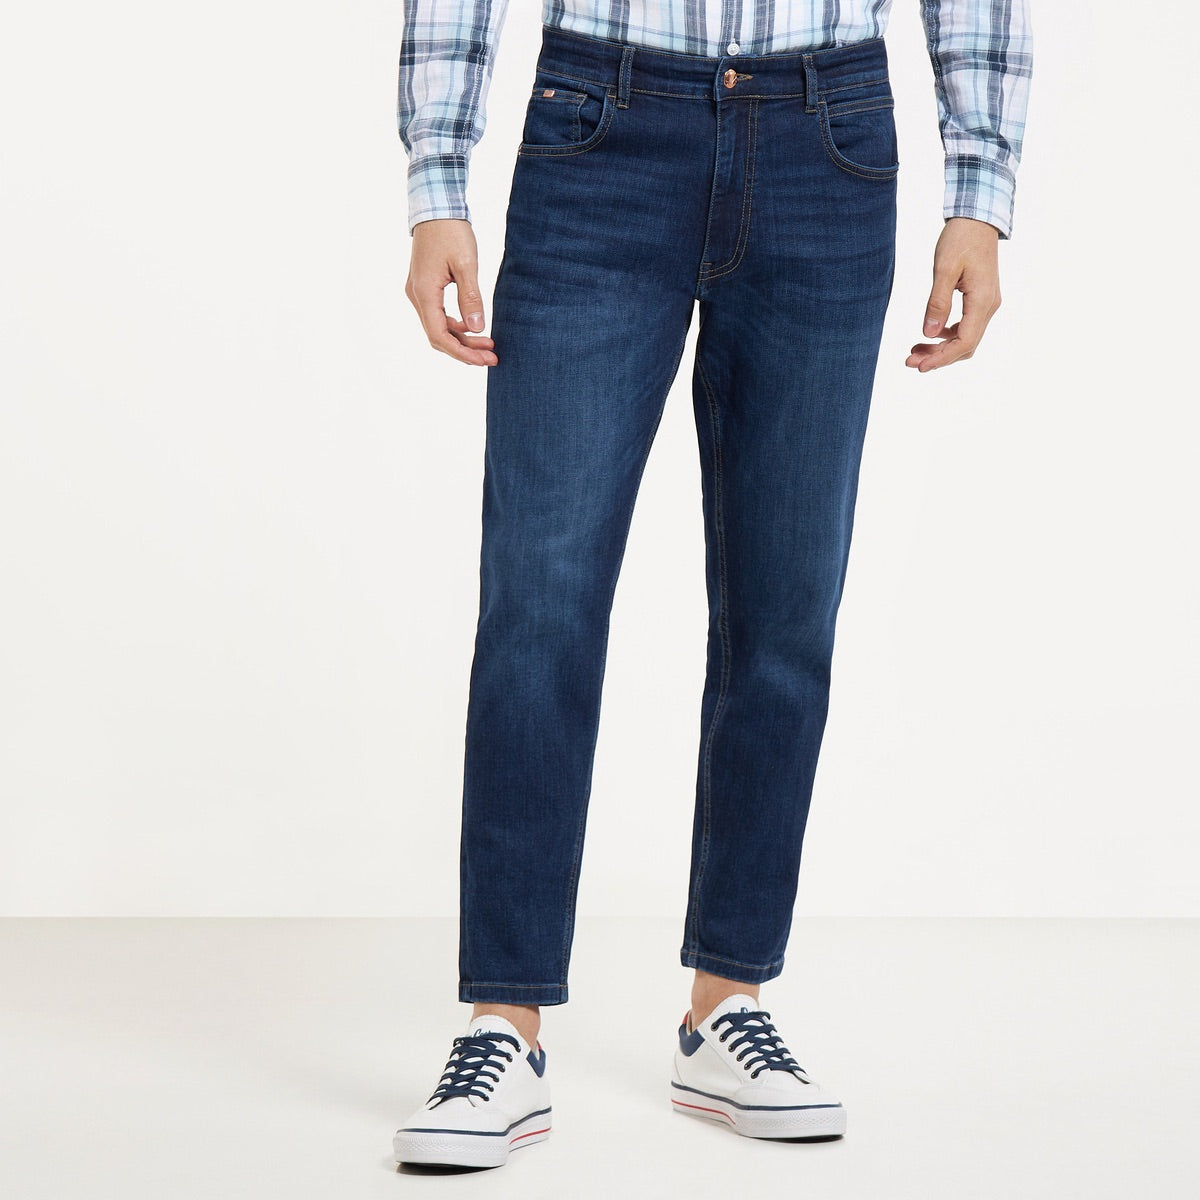 Solid Carrot Fit Jeans with Pockets